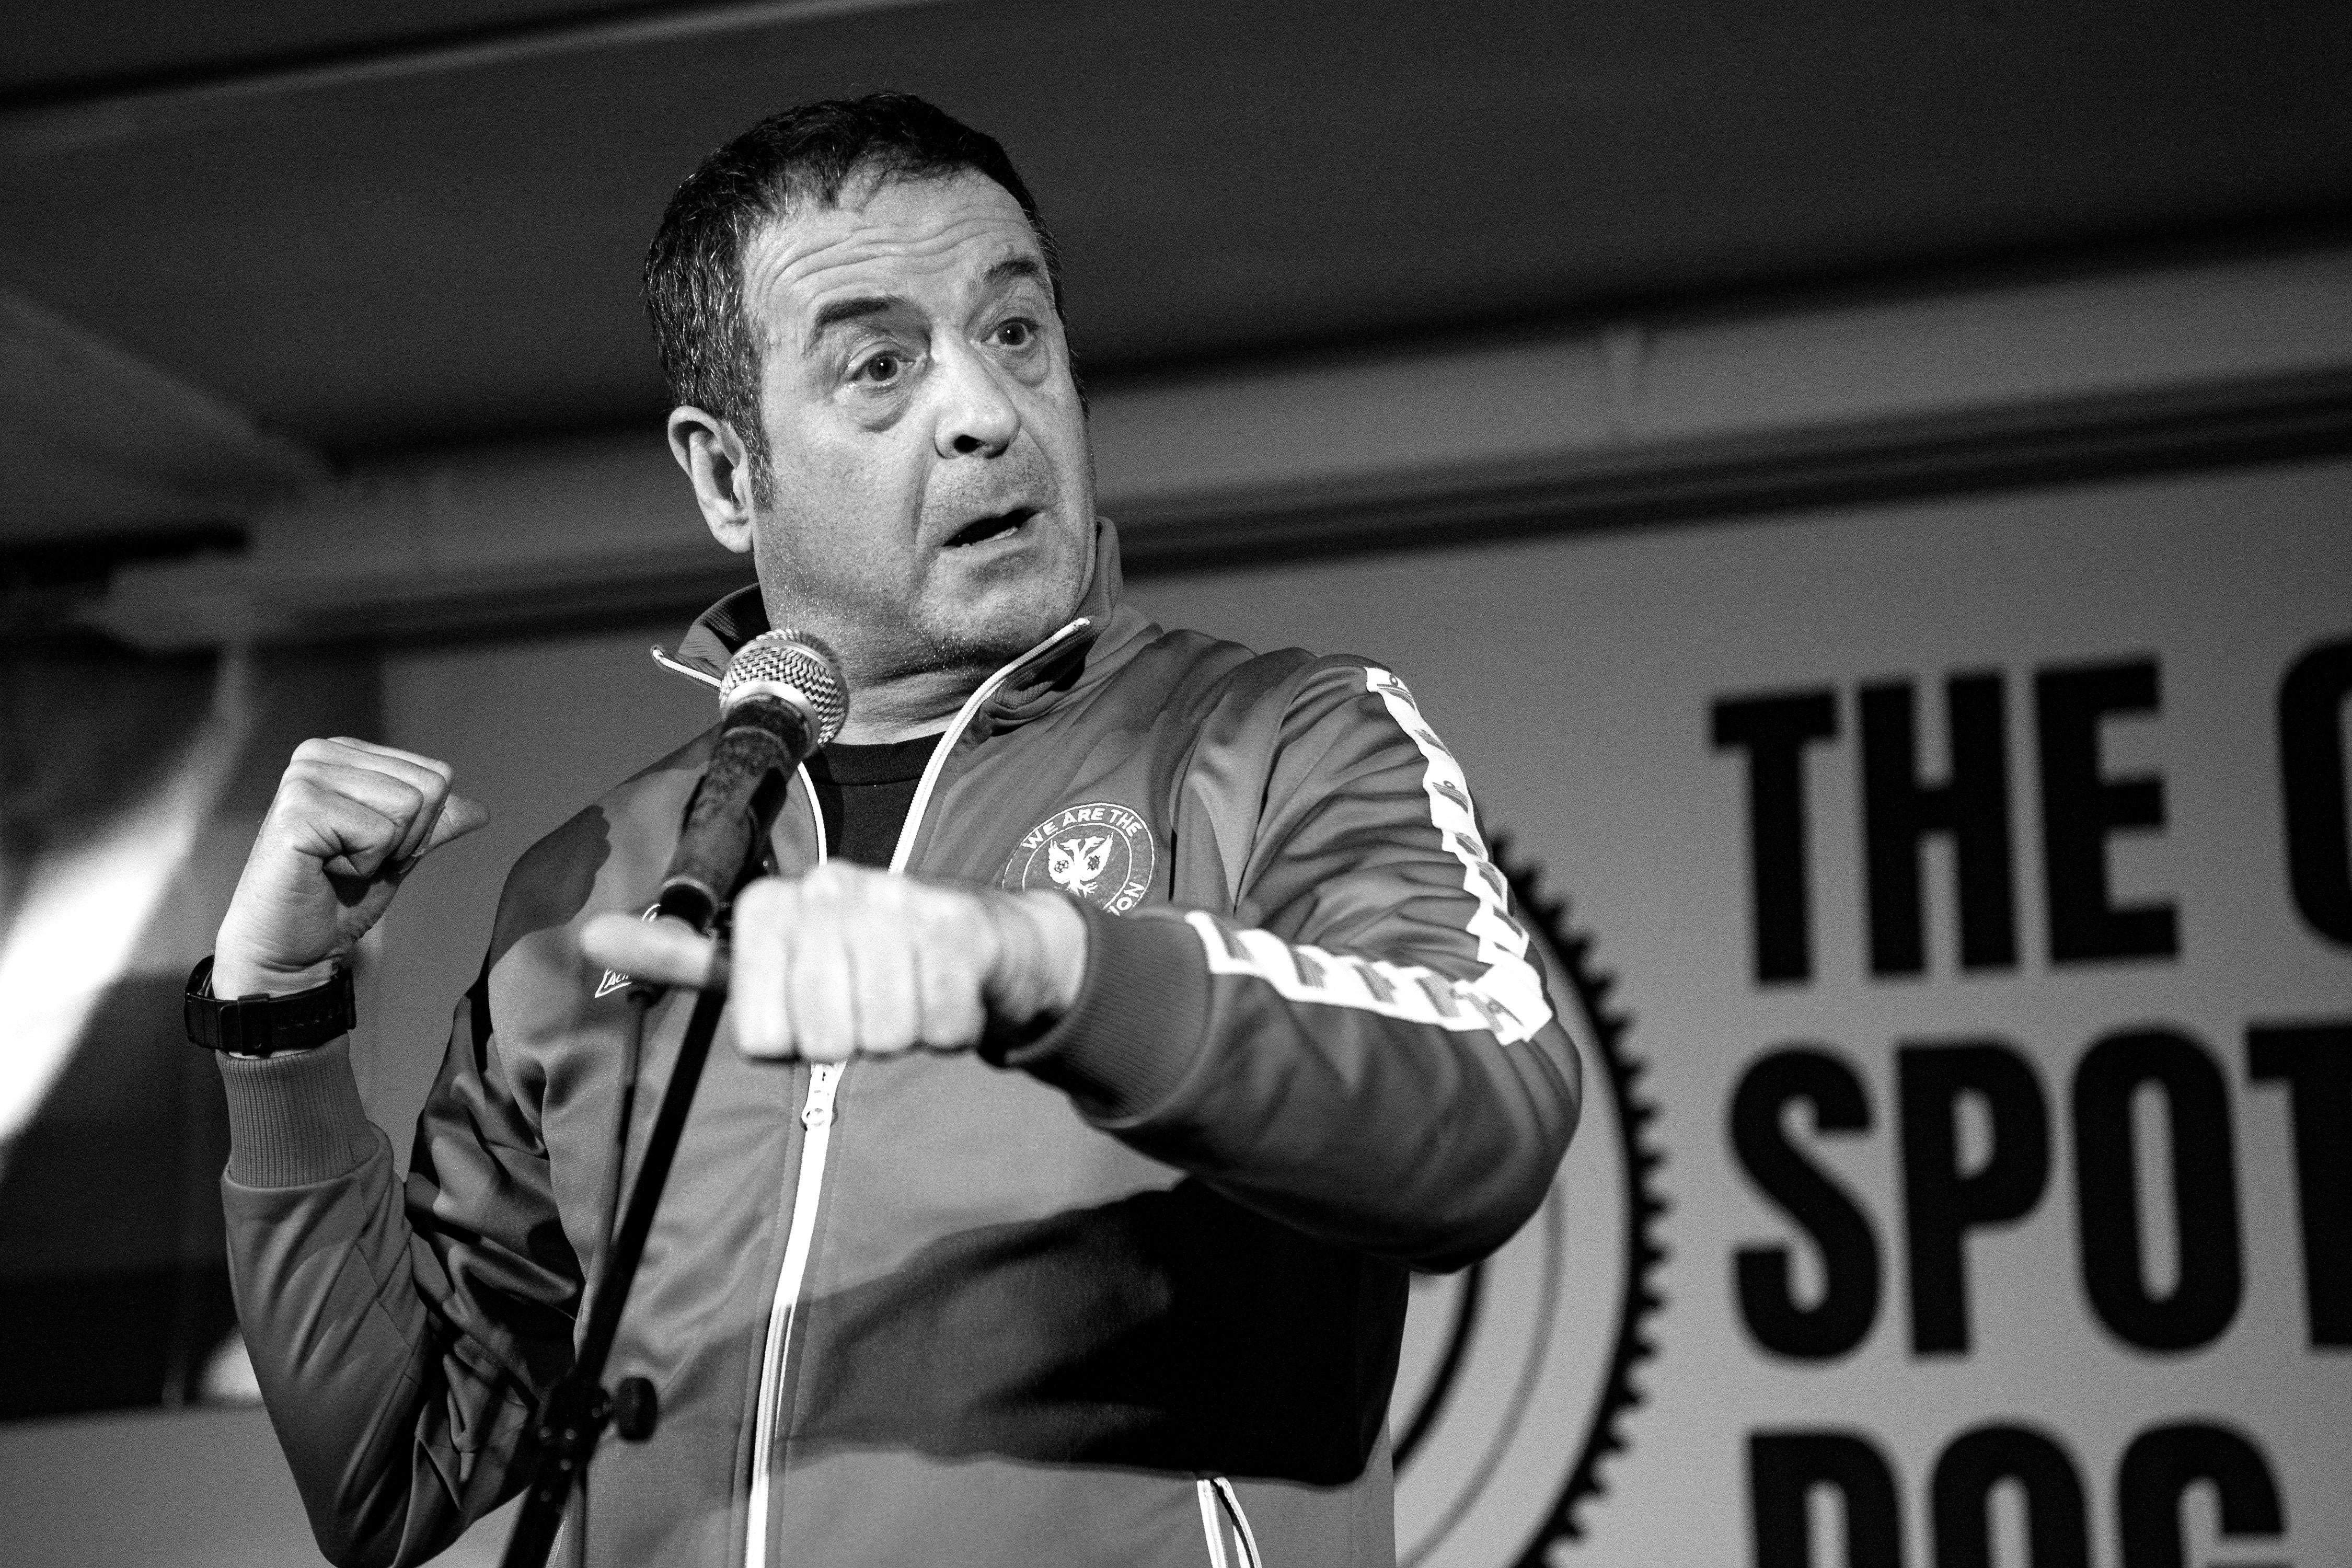 Mark Thomas: Gaffa Tapes in Aberdeen promo photo for Ticketmaster presale offer code